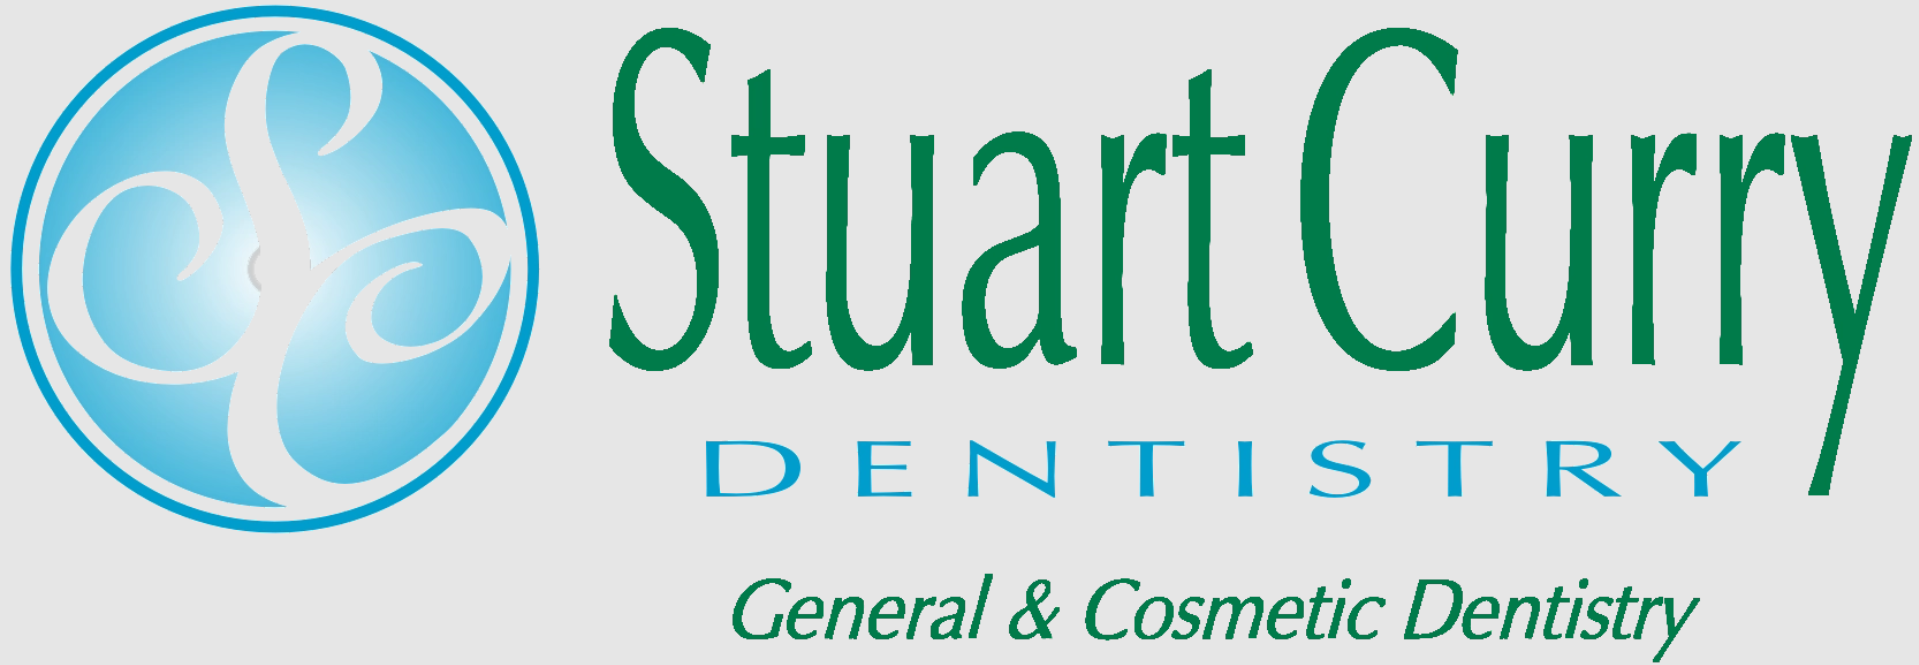 Stuart Curry Dentistry Offers Quick Tips for Parents on Children’s Dental Health